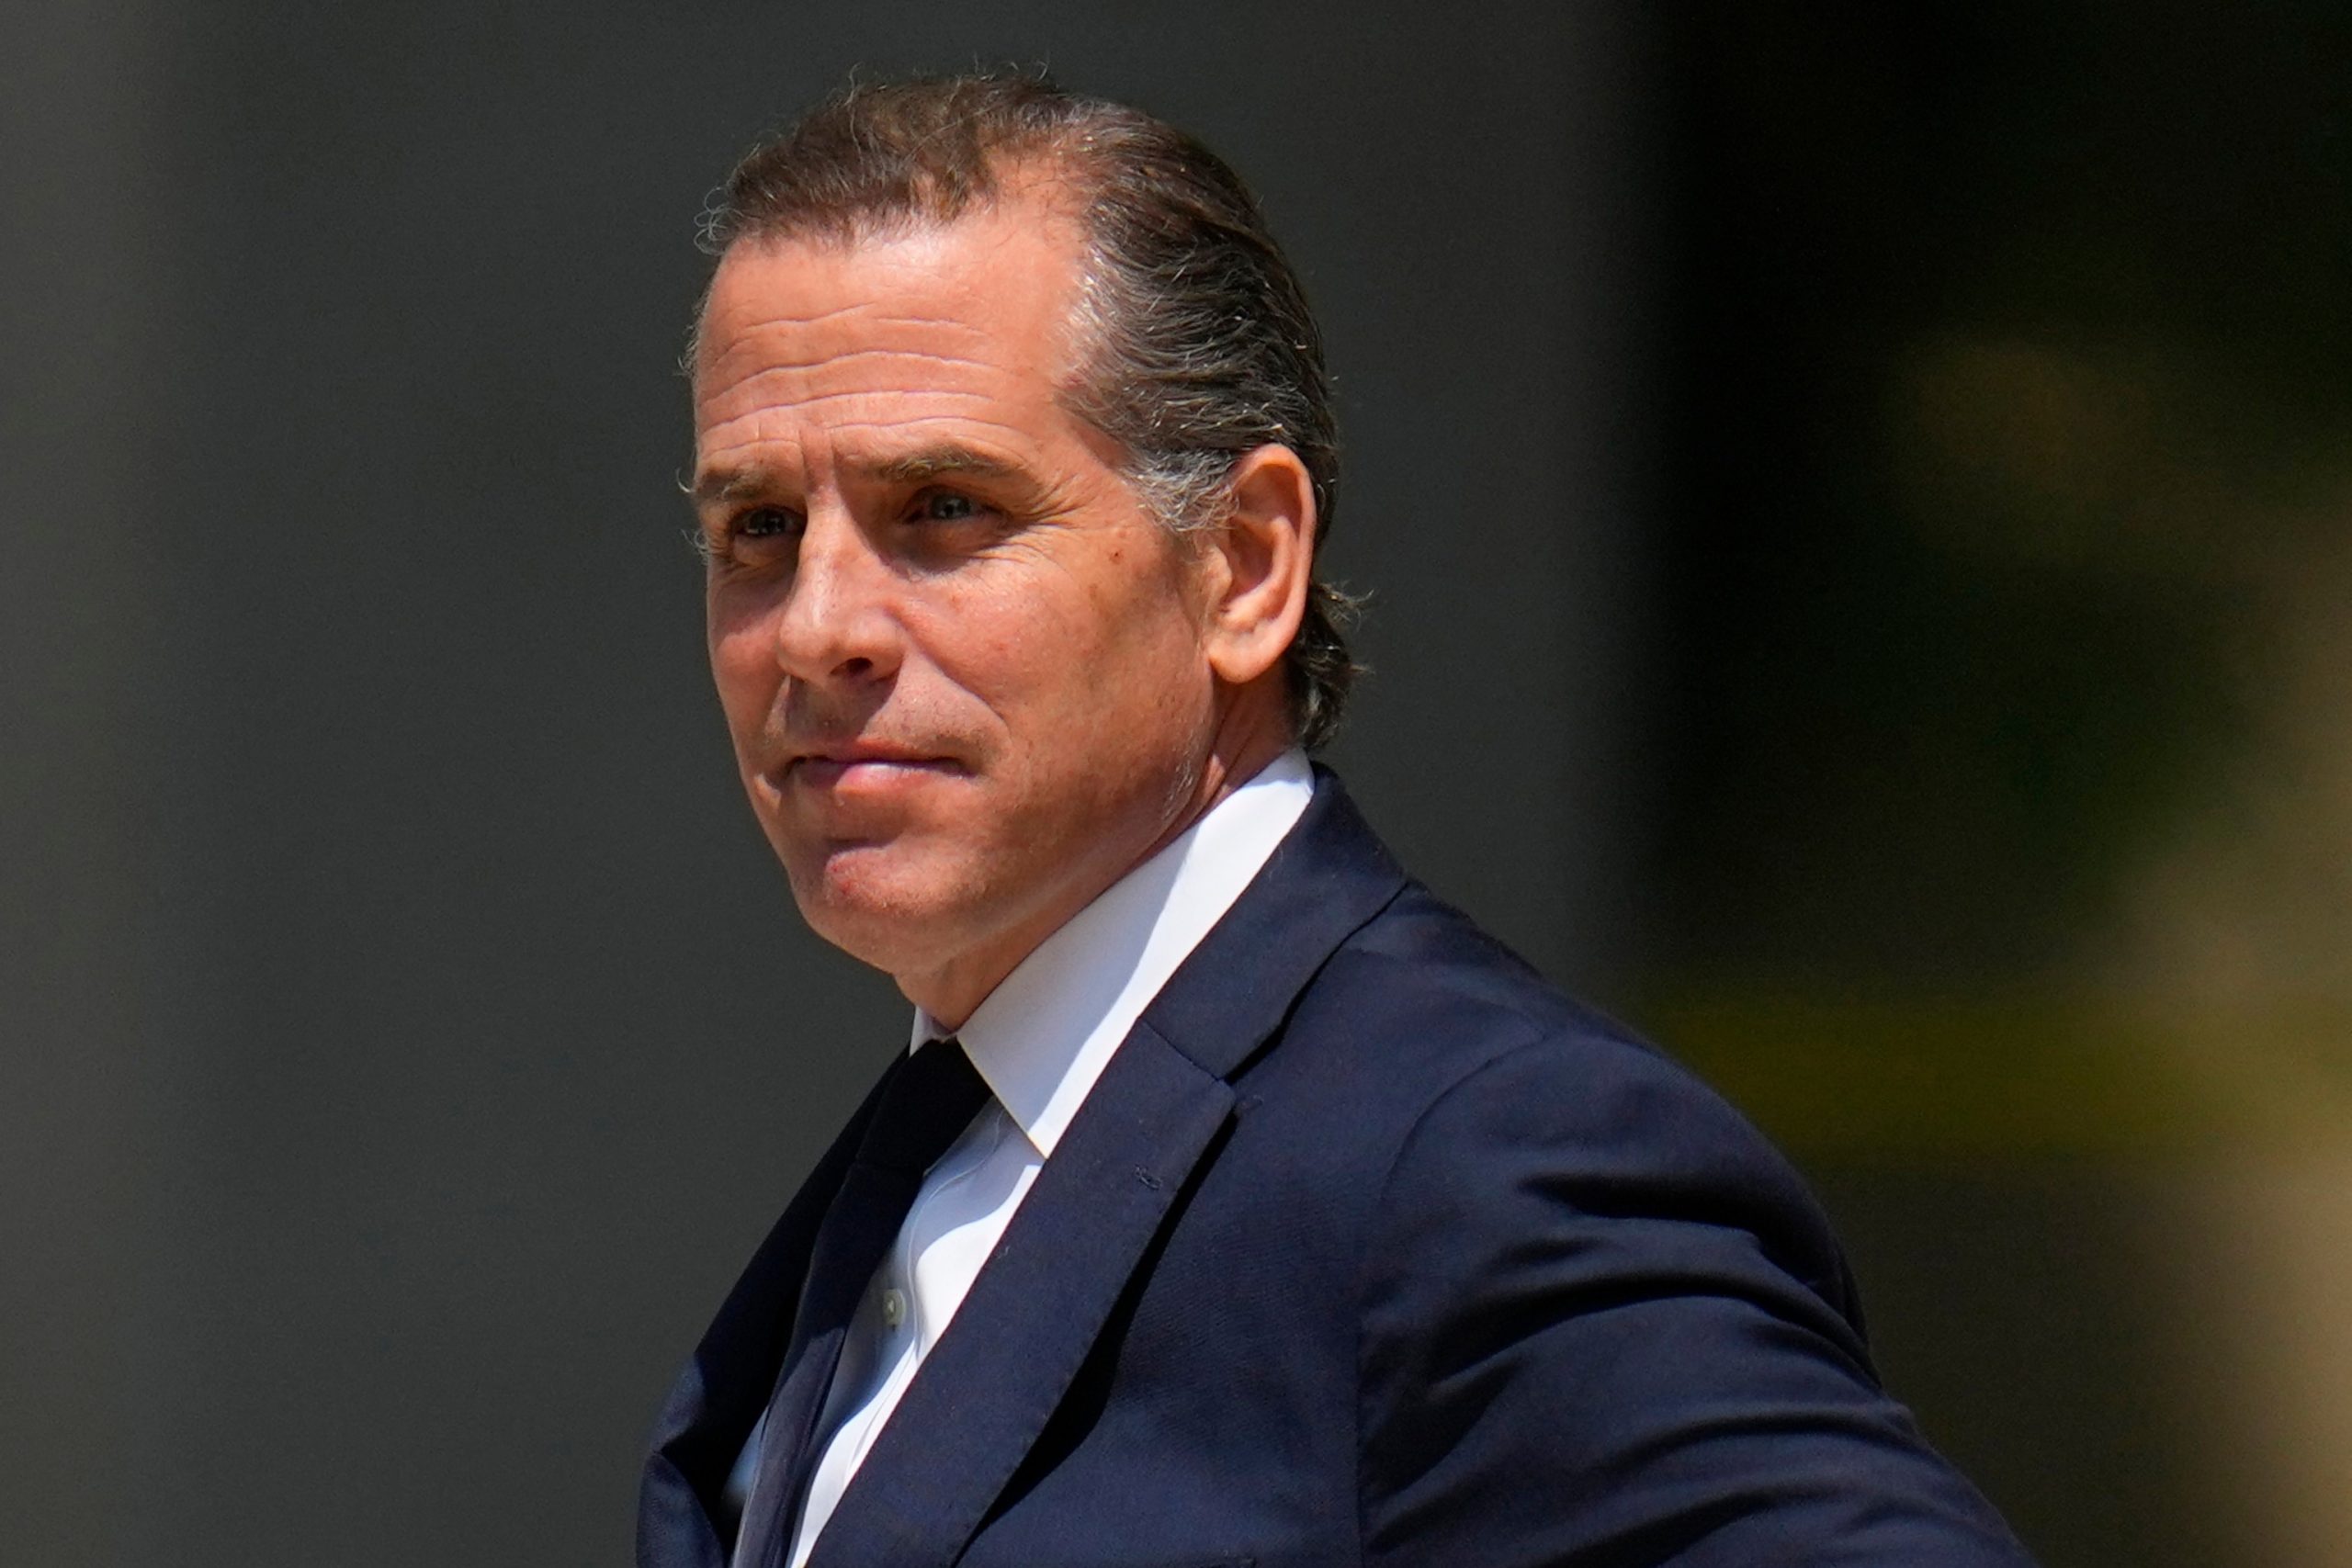 Court filing indicates Hunter Biden's intention to plead not guilty on felony gun charges